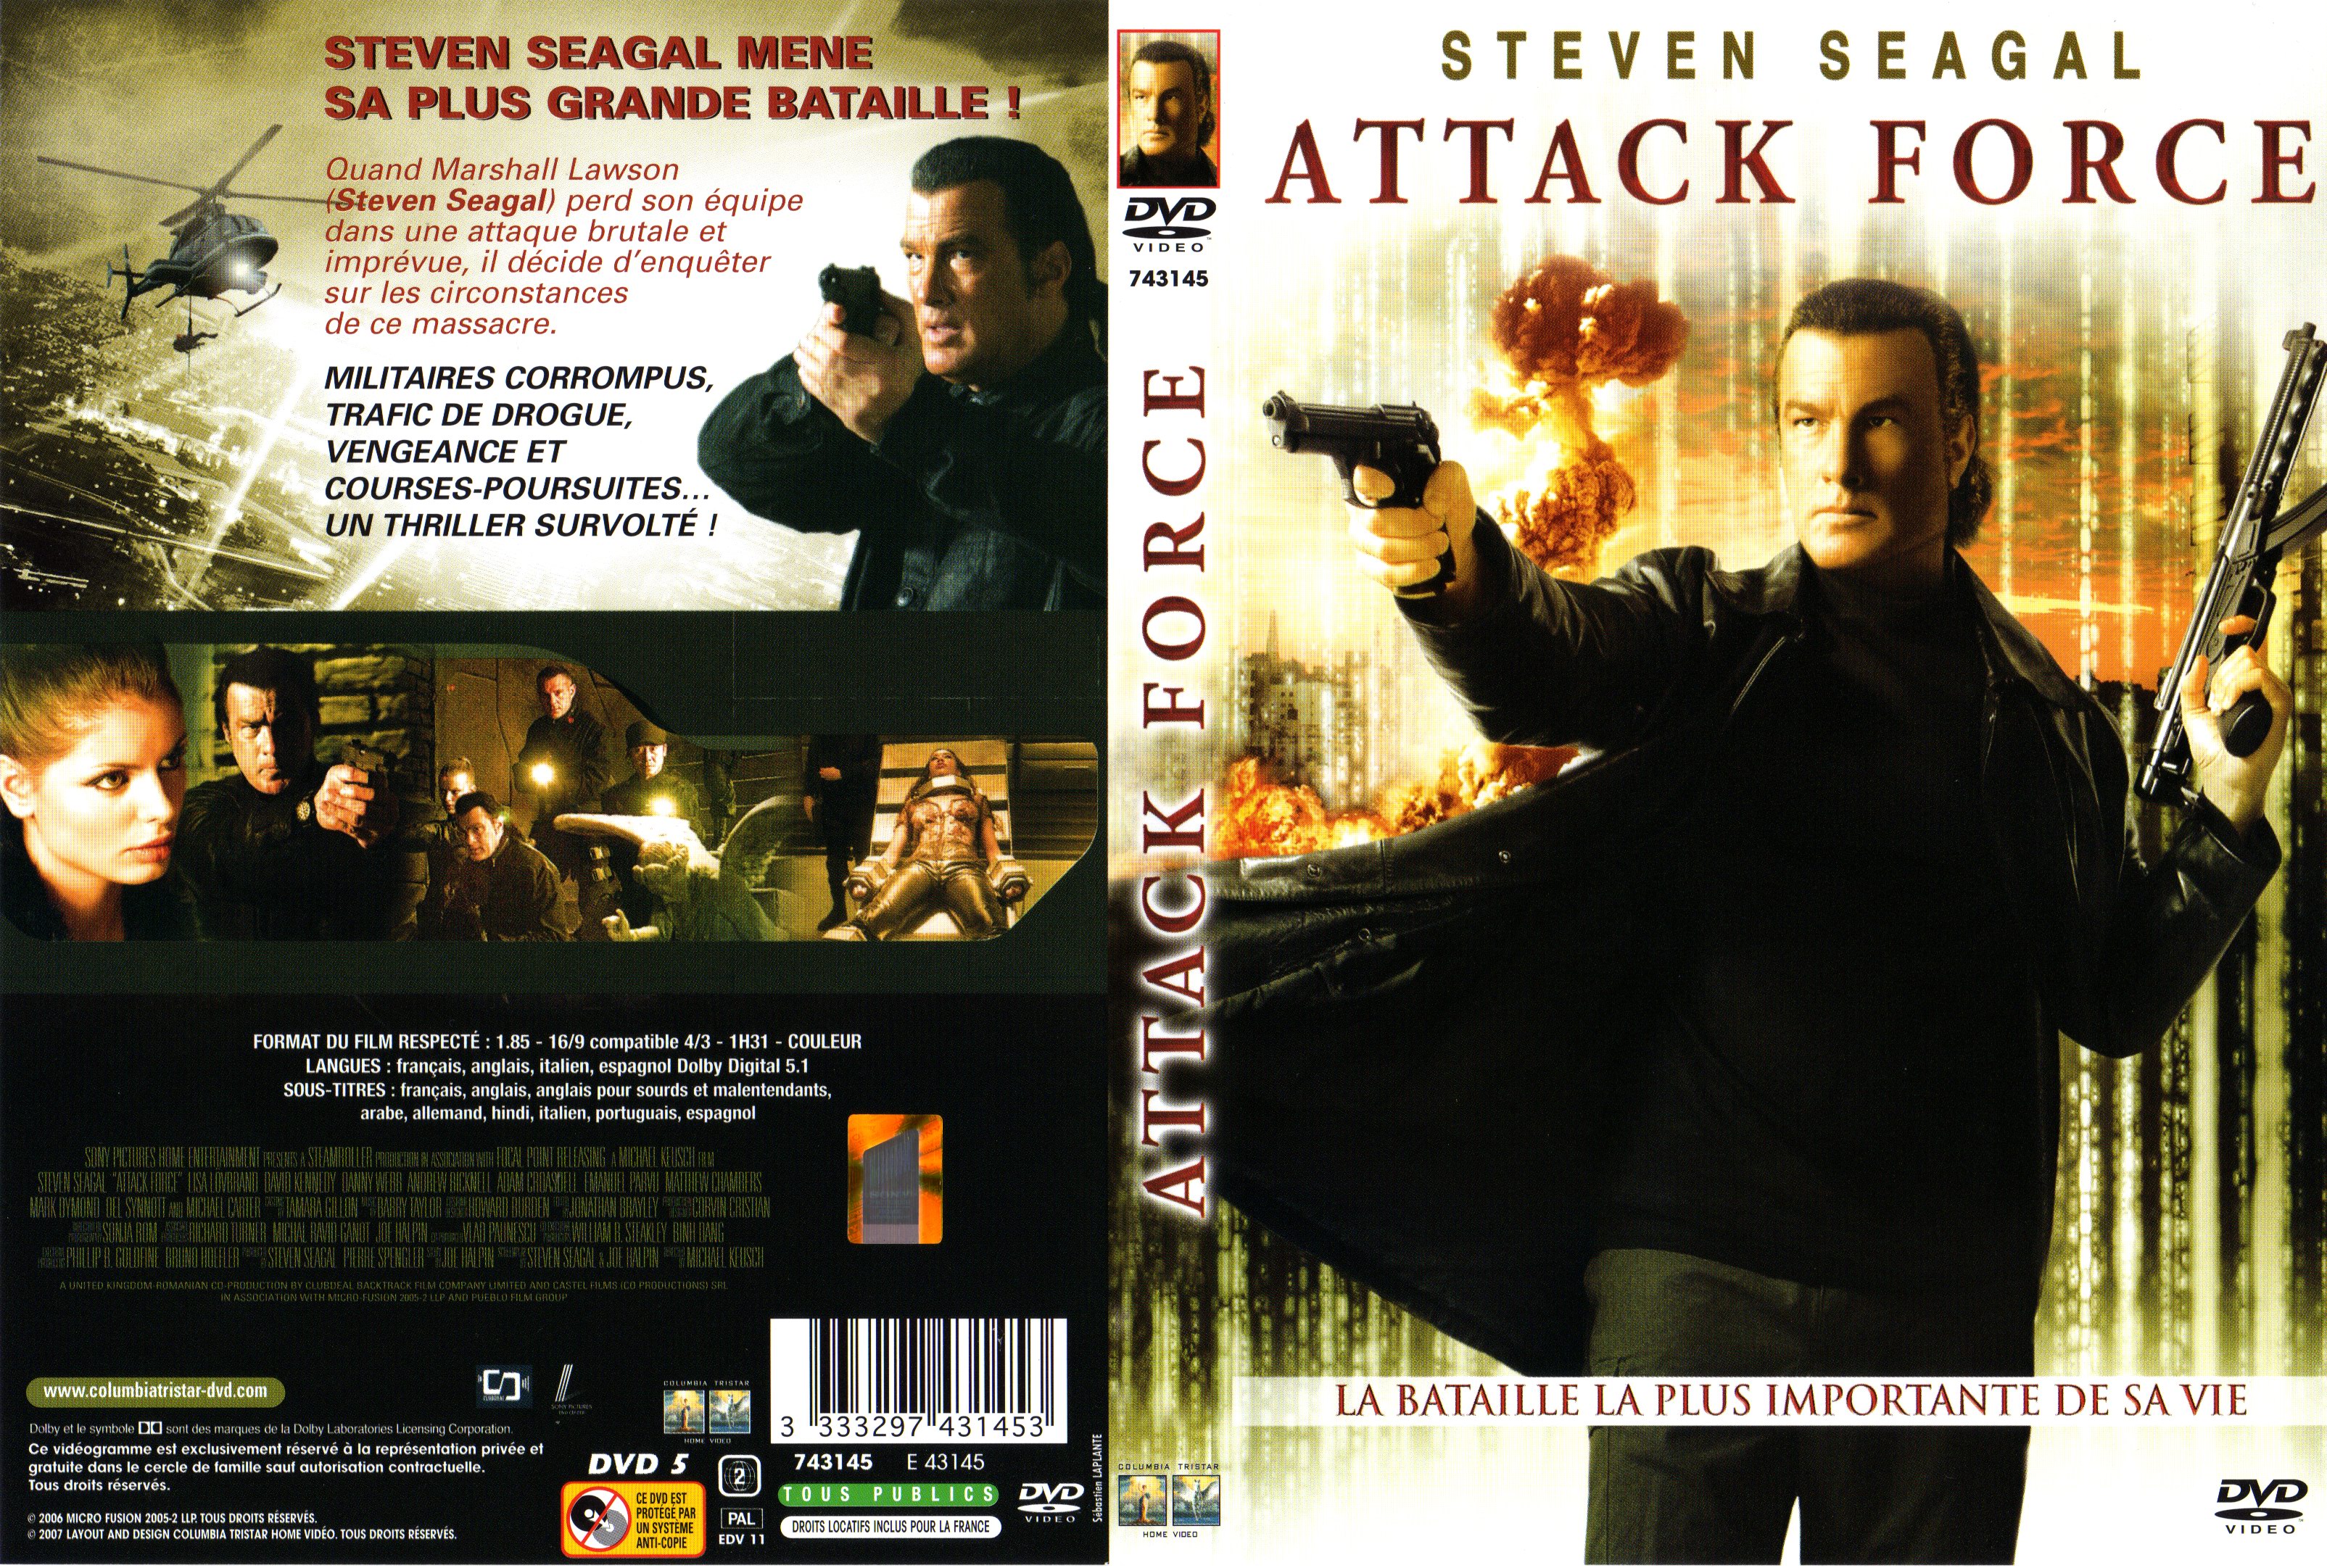 Jaquette DVD Attack force